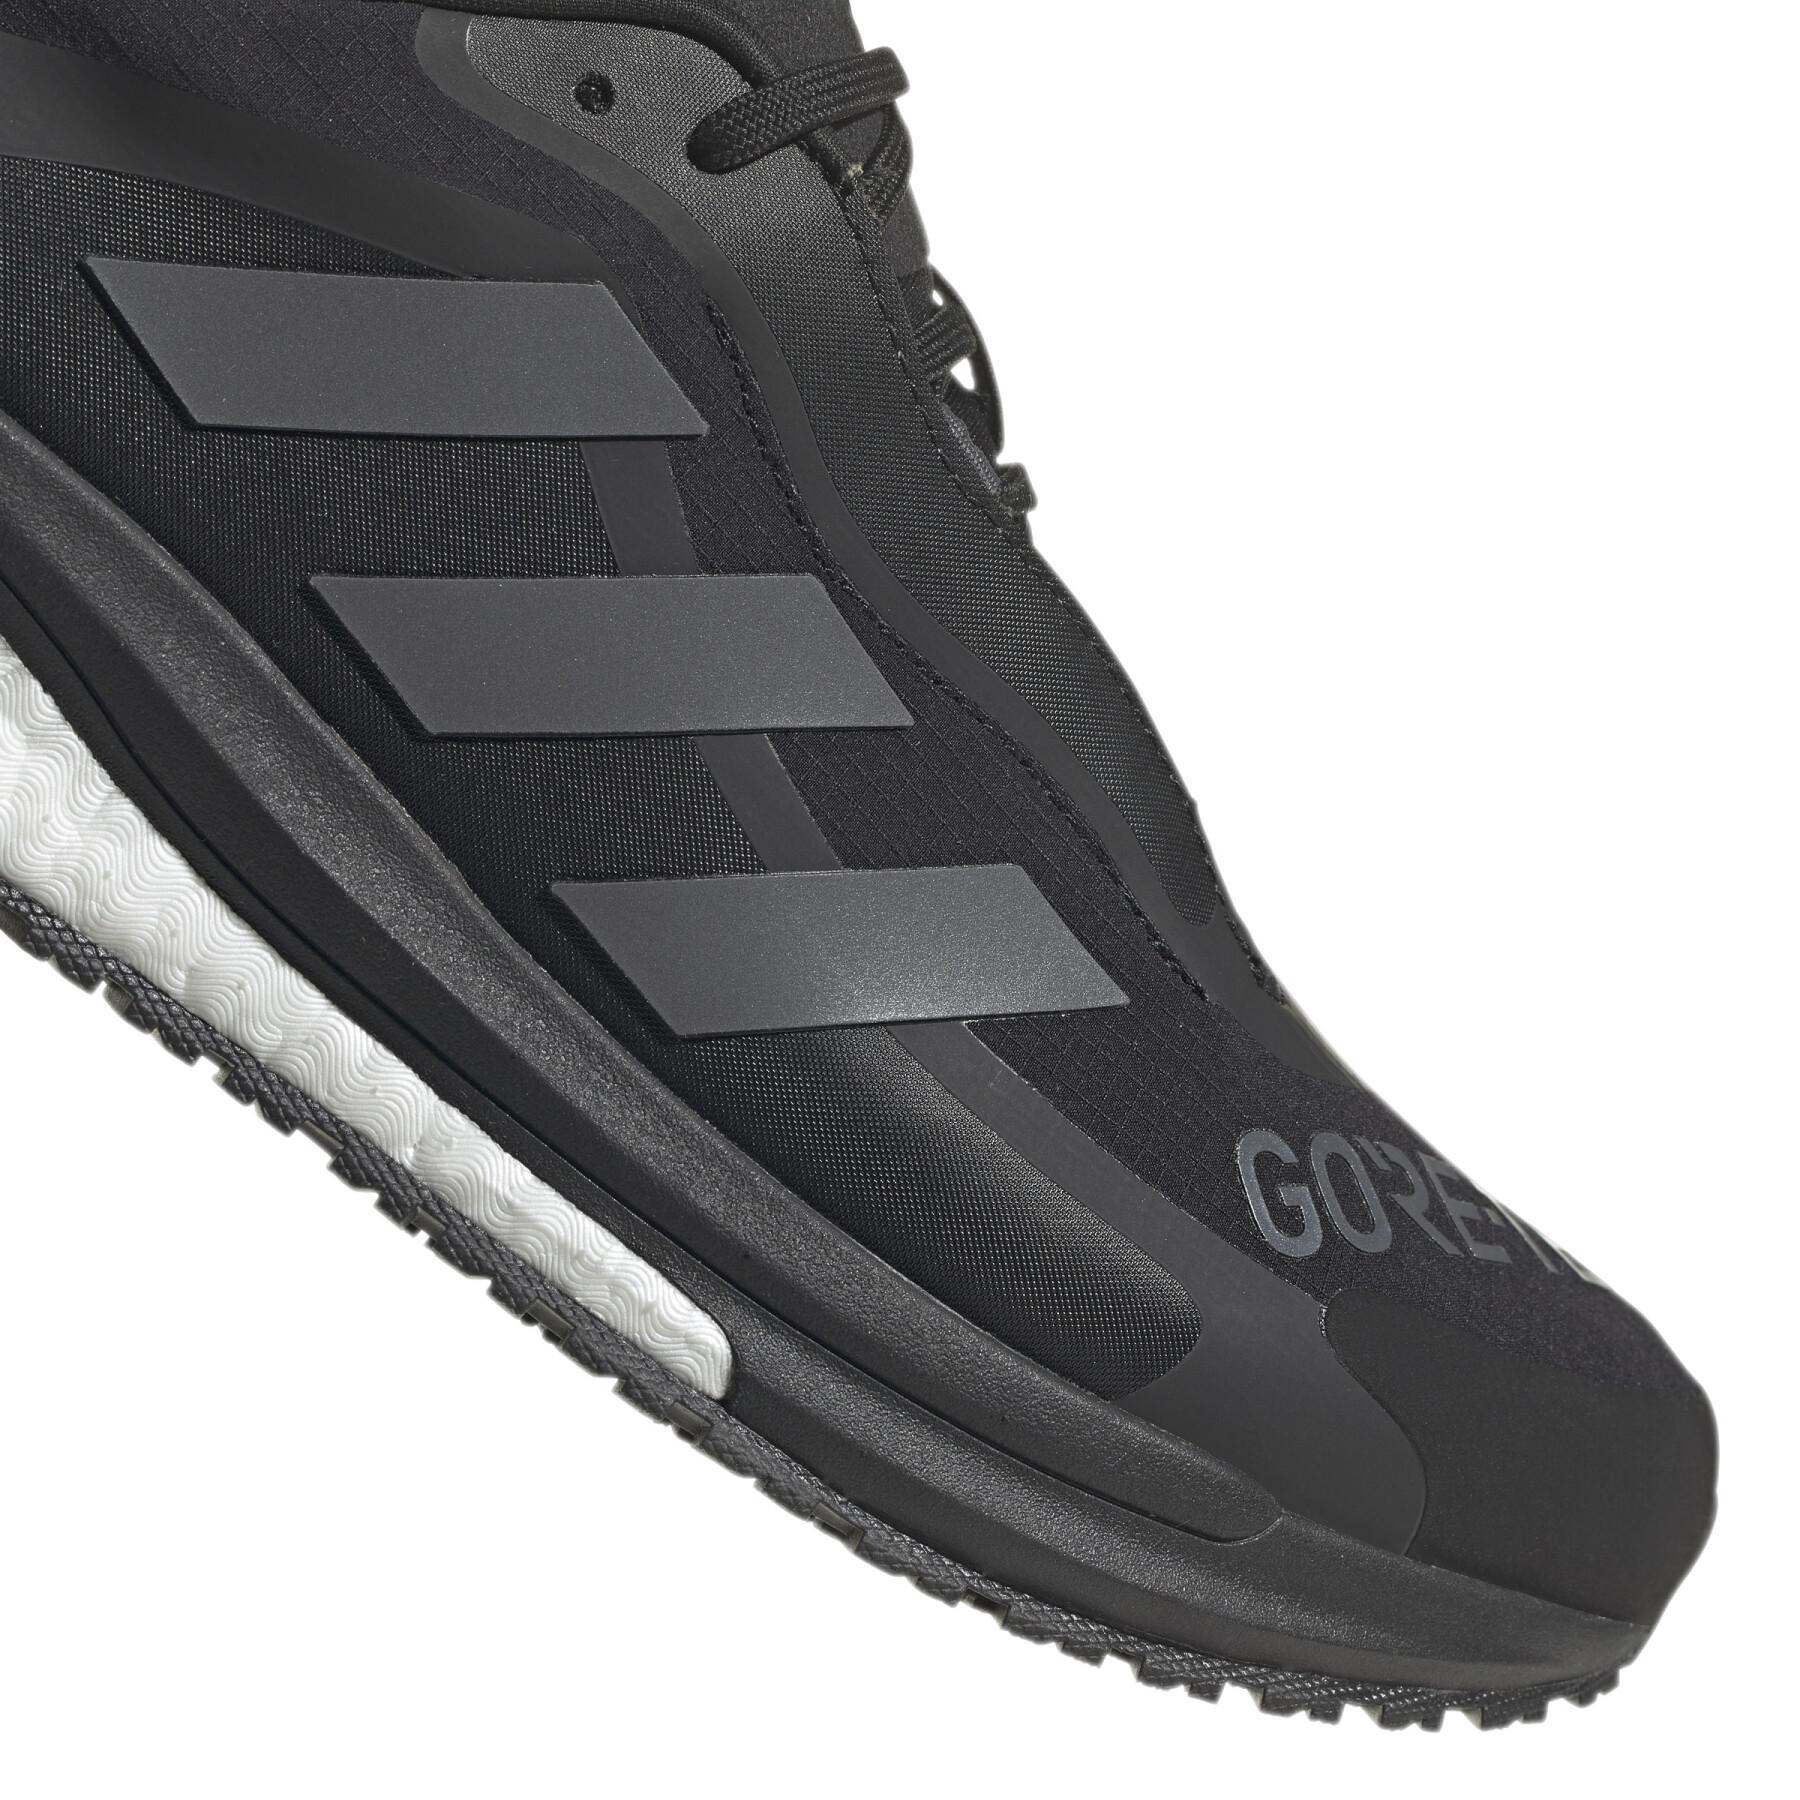 Shoes adidas SolarGlide 4 GORE-TEX